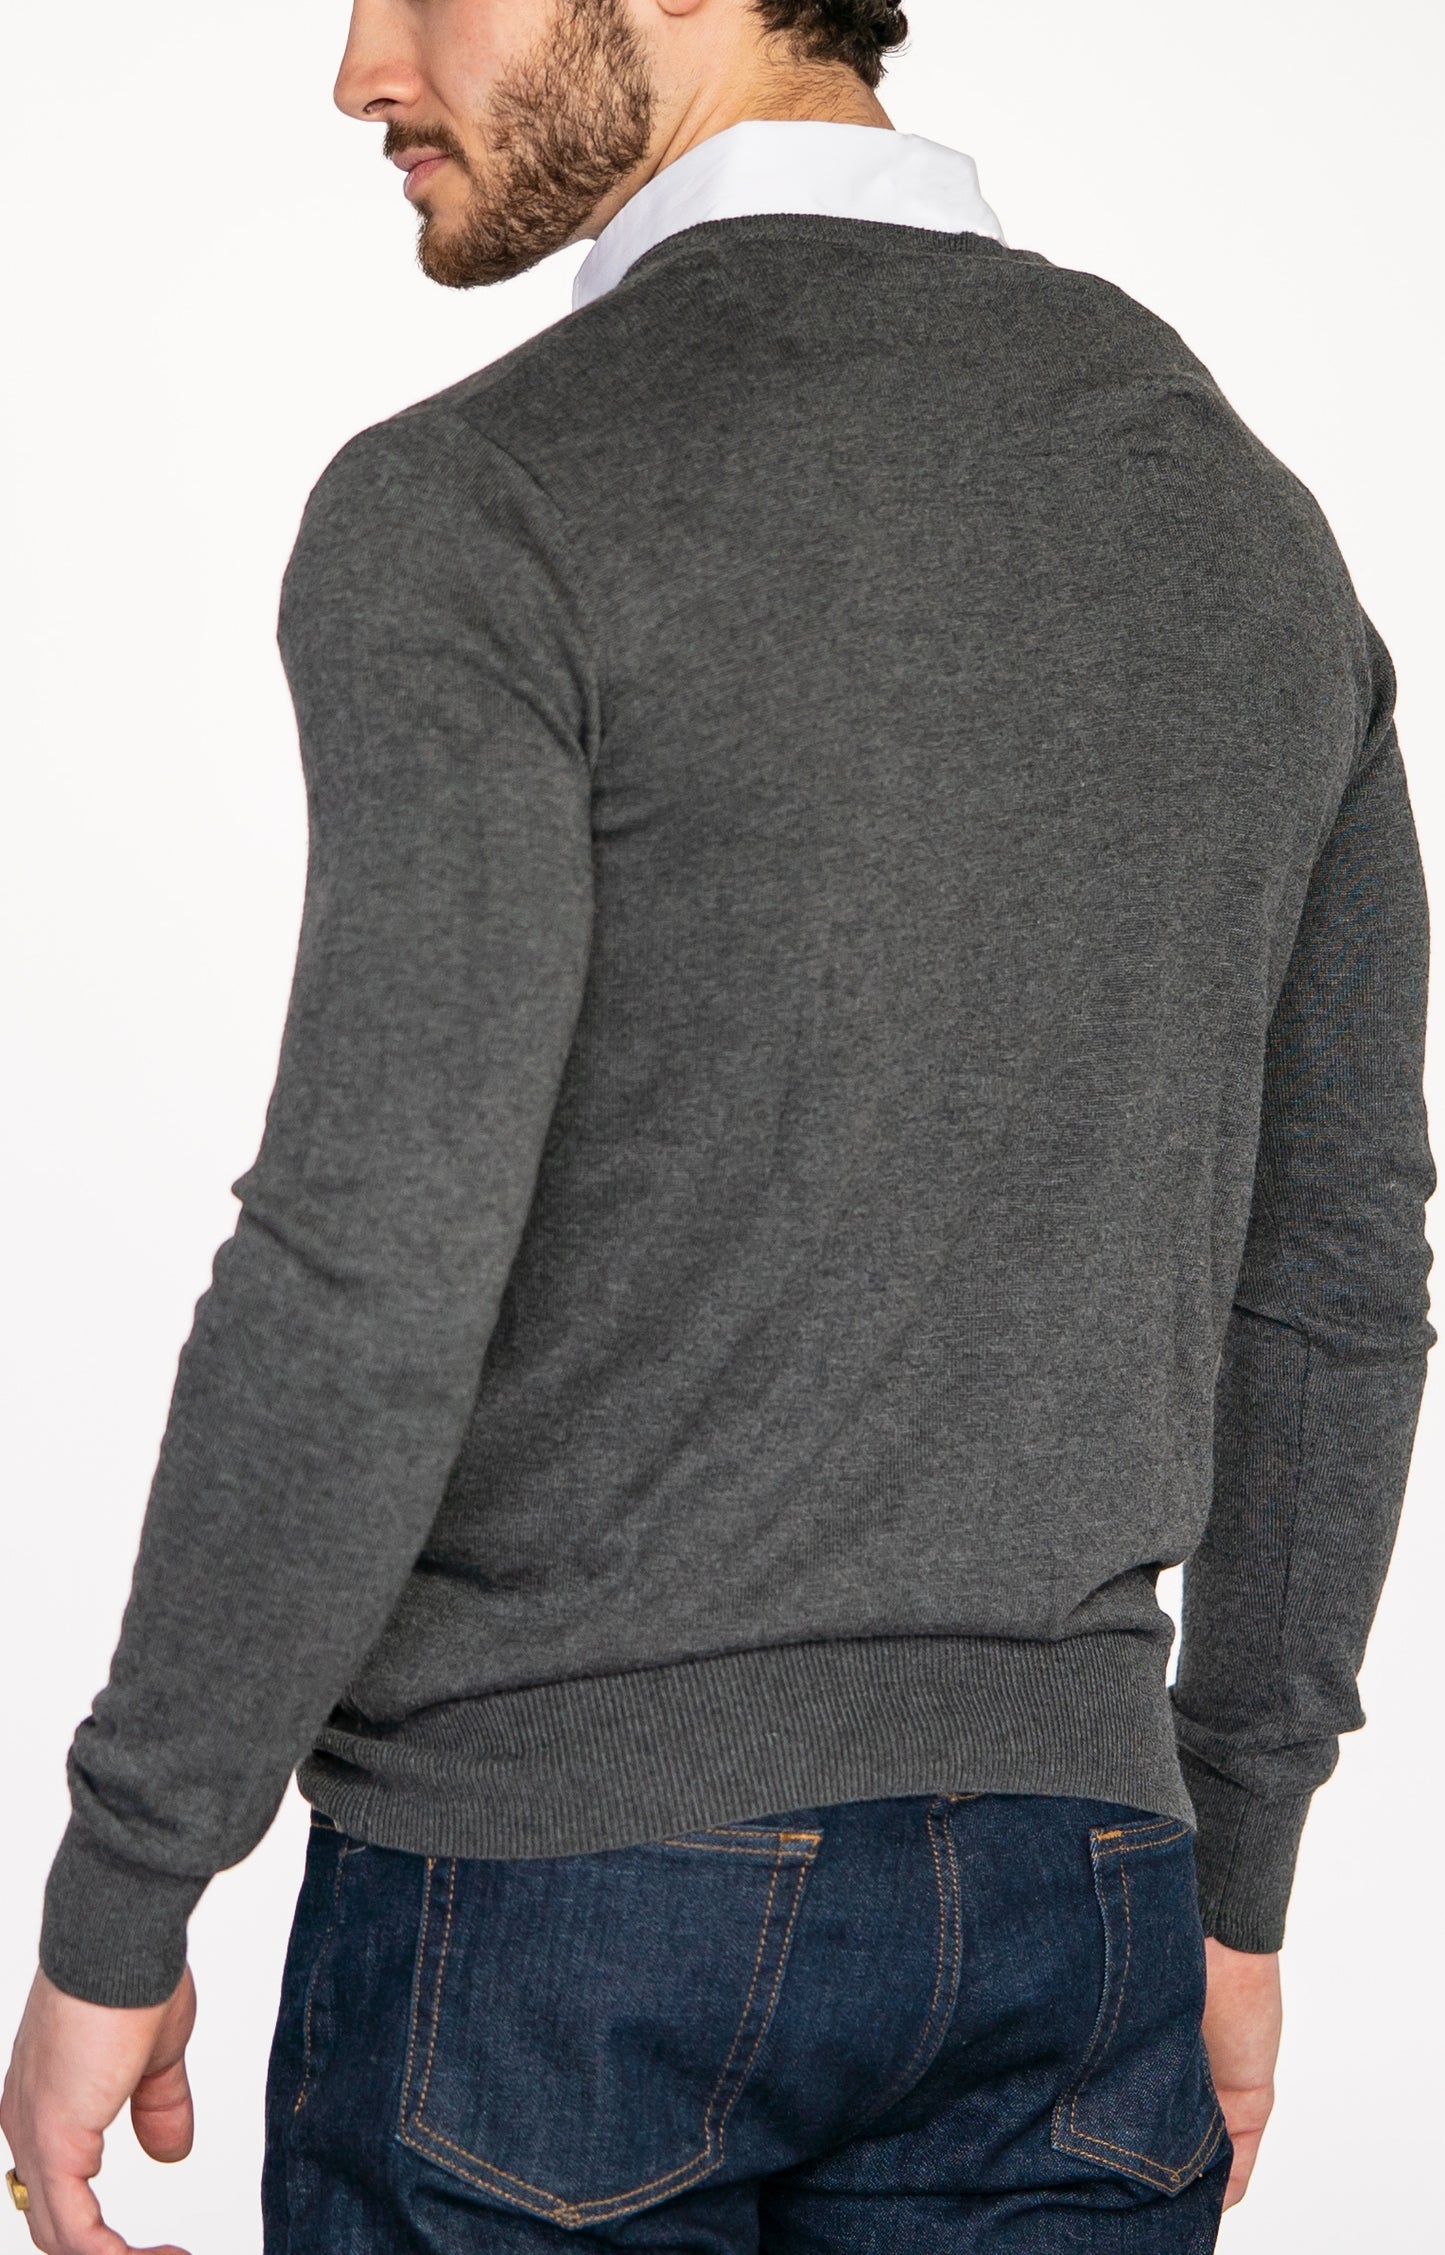 Charcoal Sweater with White Collared Shirt